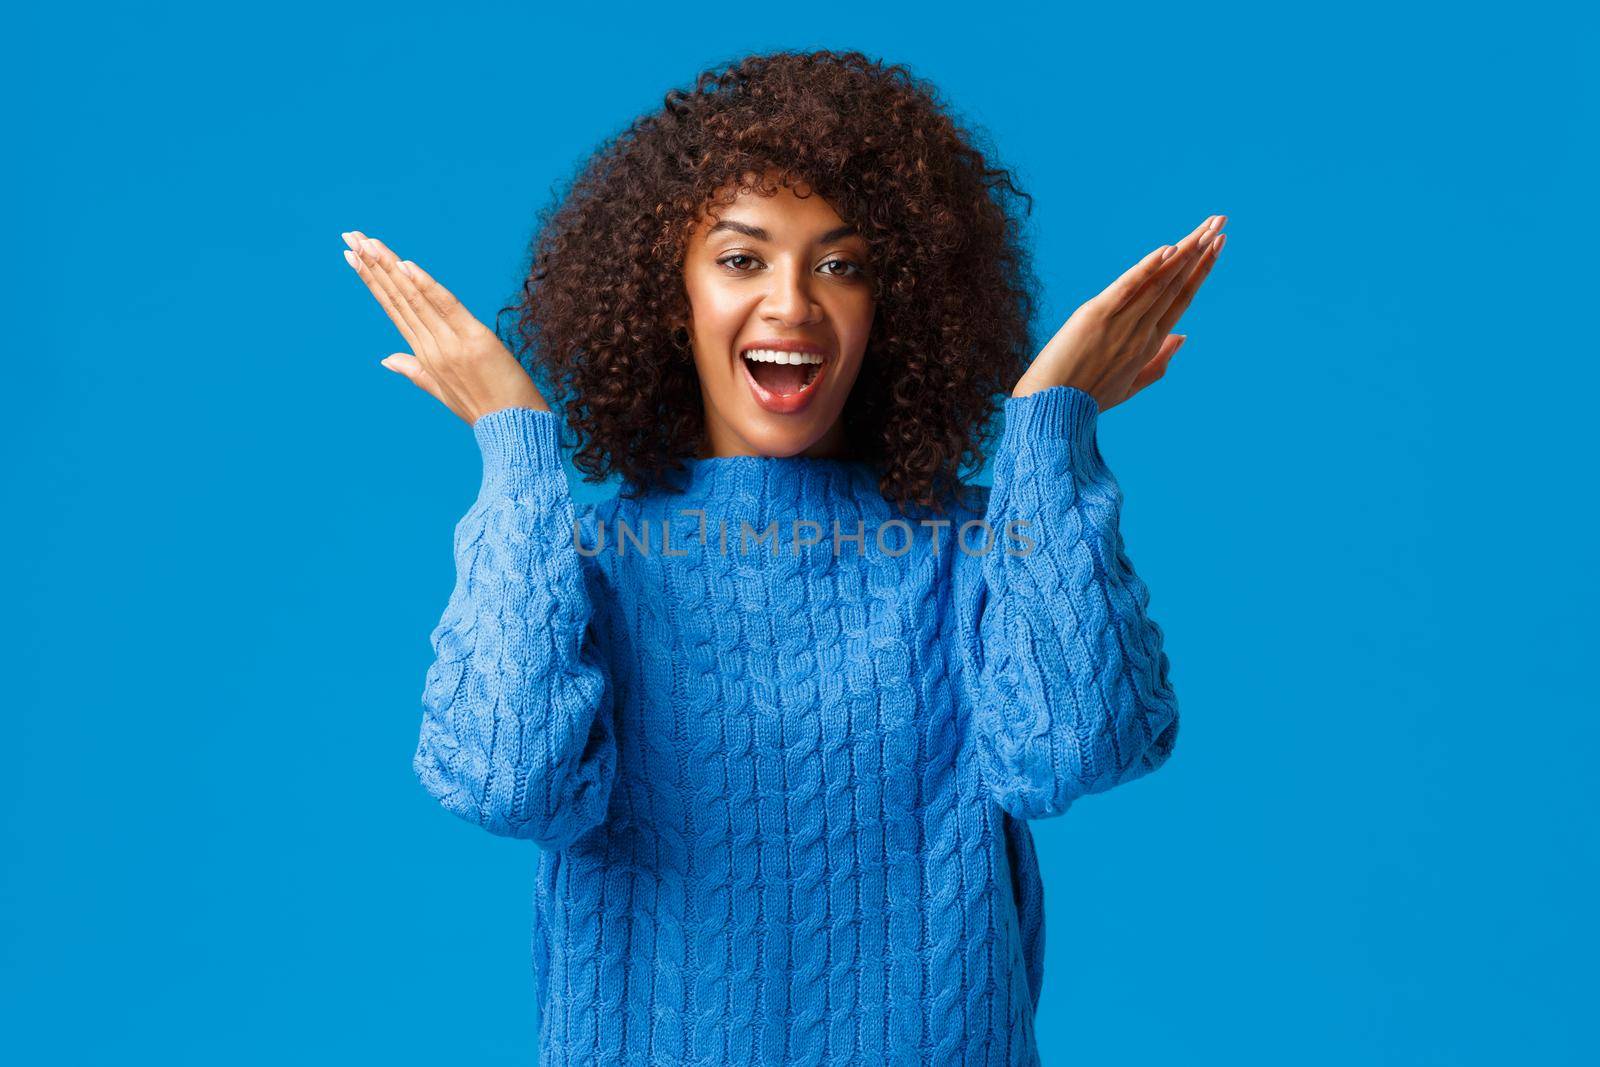 Cute and playful, funny happy african-american woman with afro haircut in winter sweater, open eyes to see holiday surprise, valentines day secret gift, staring amused and delighted, blue background.